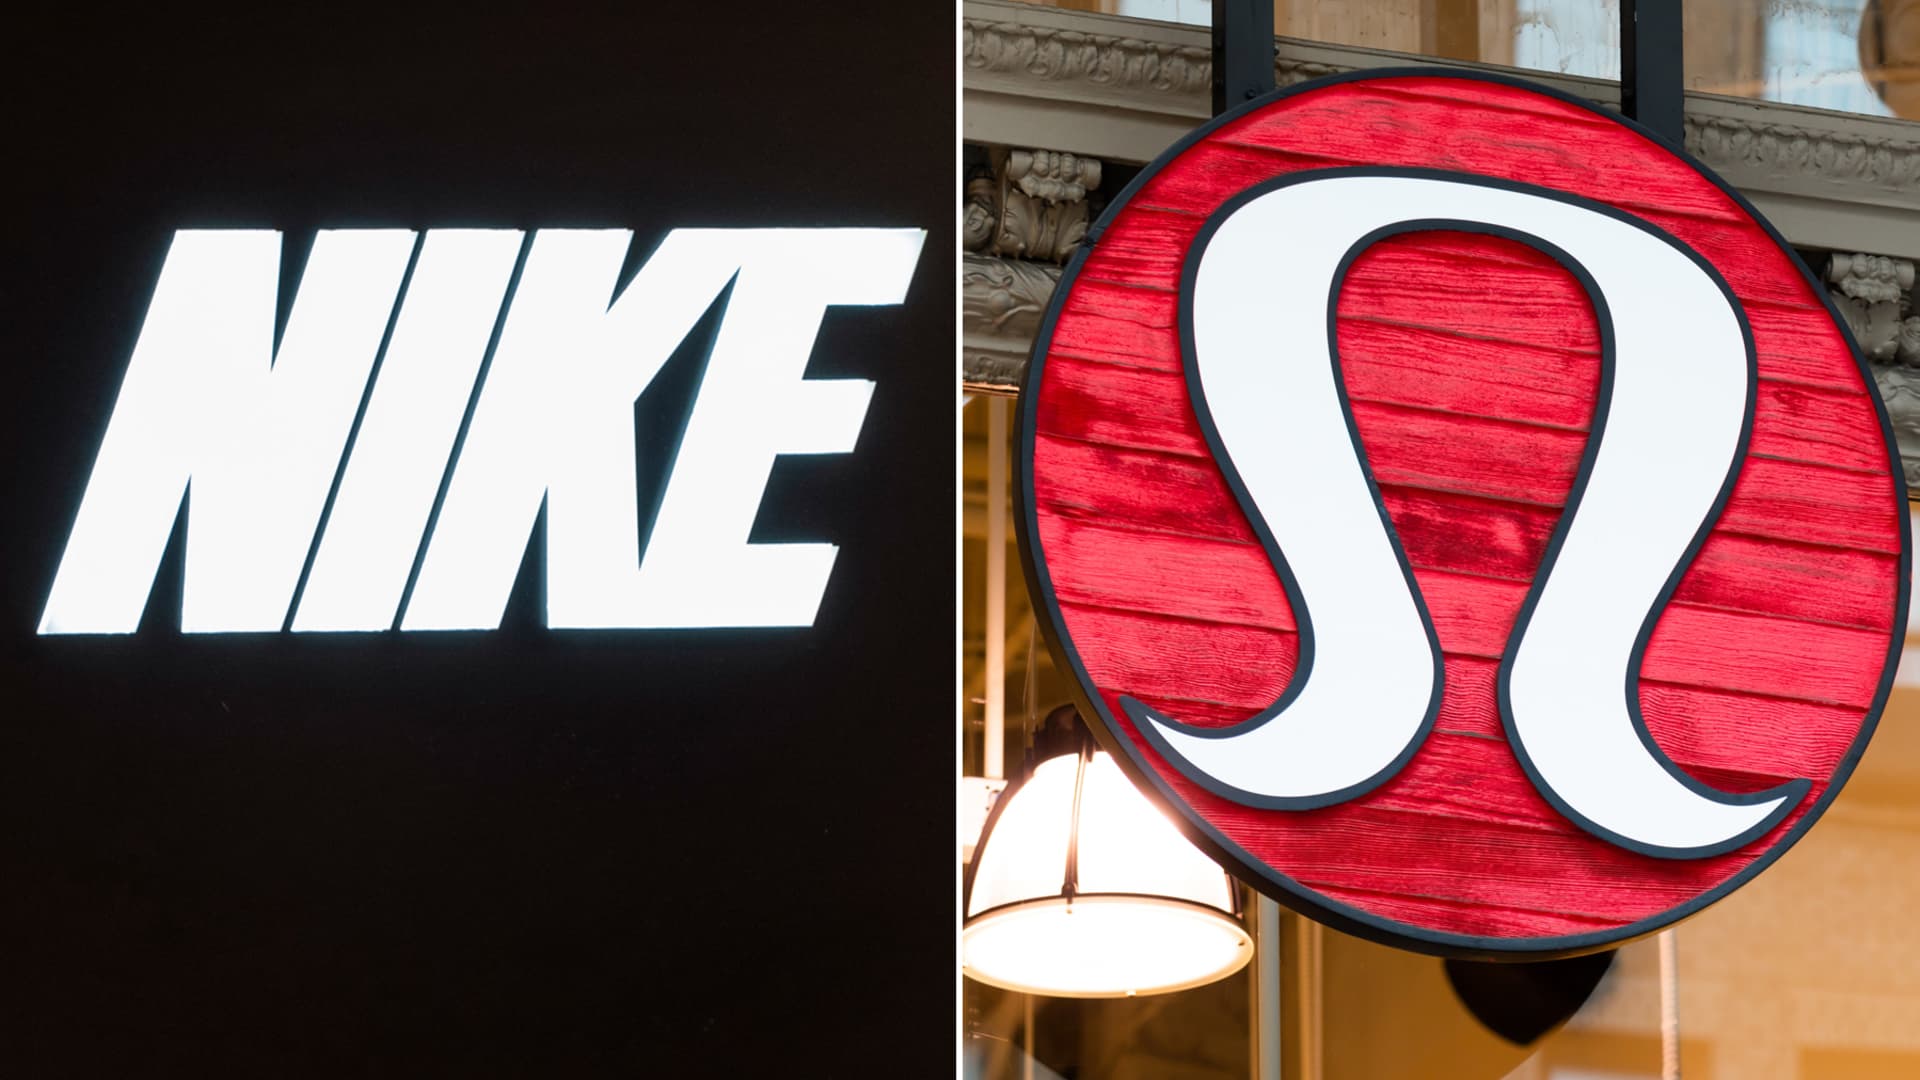 Here’s why Nike is suing Lululemon over shoe designs